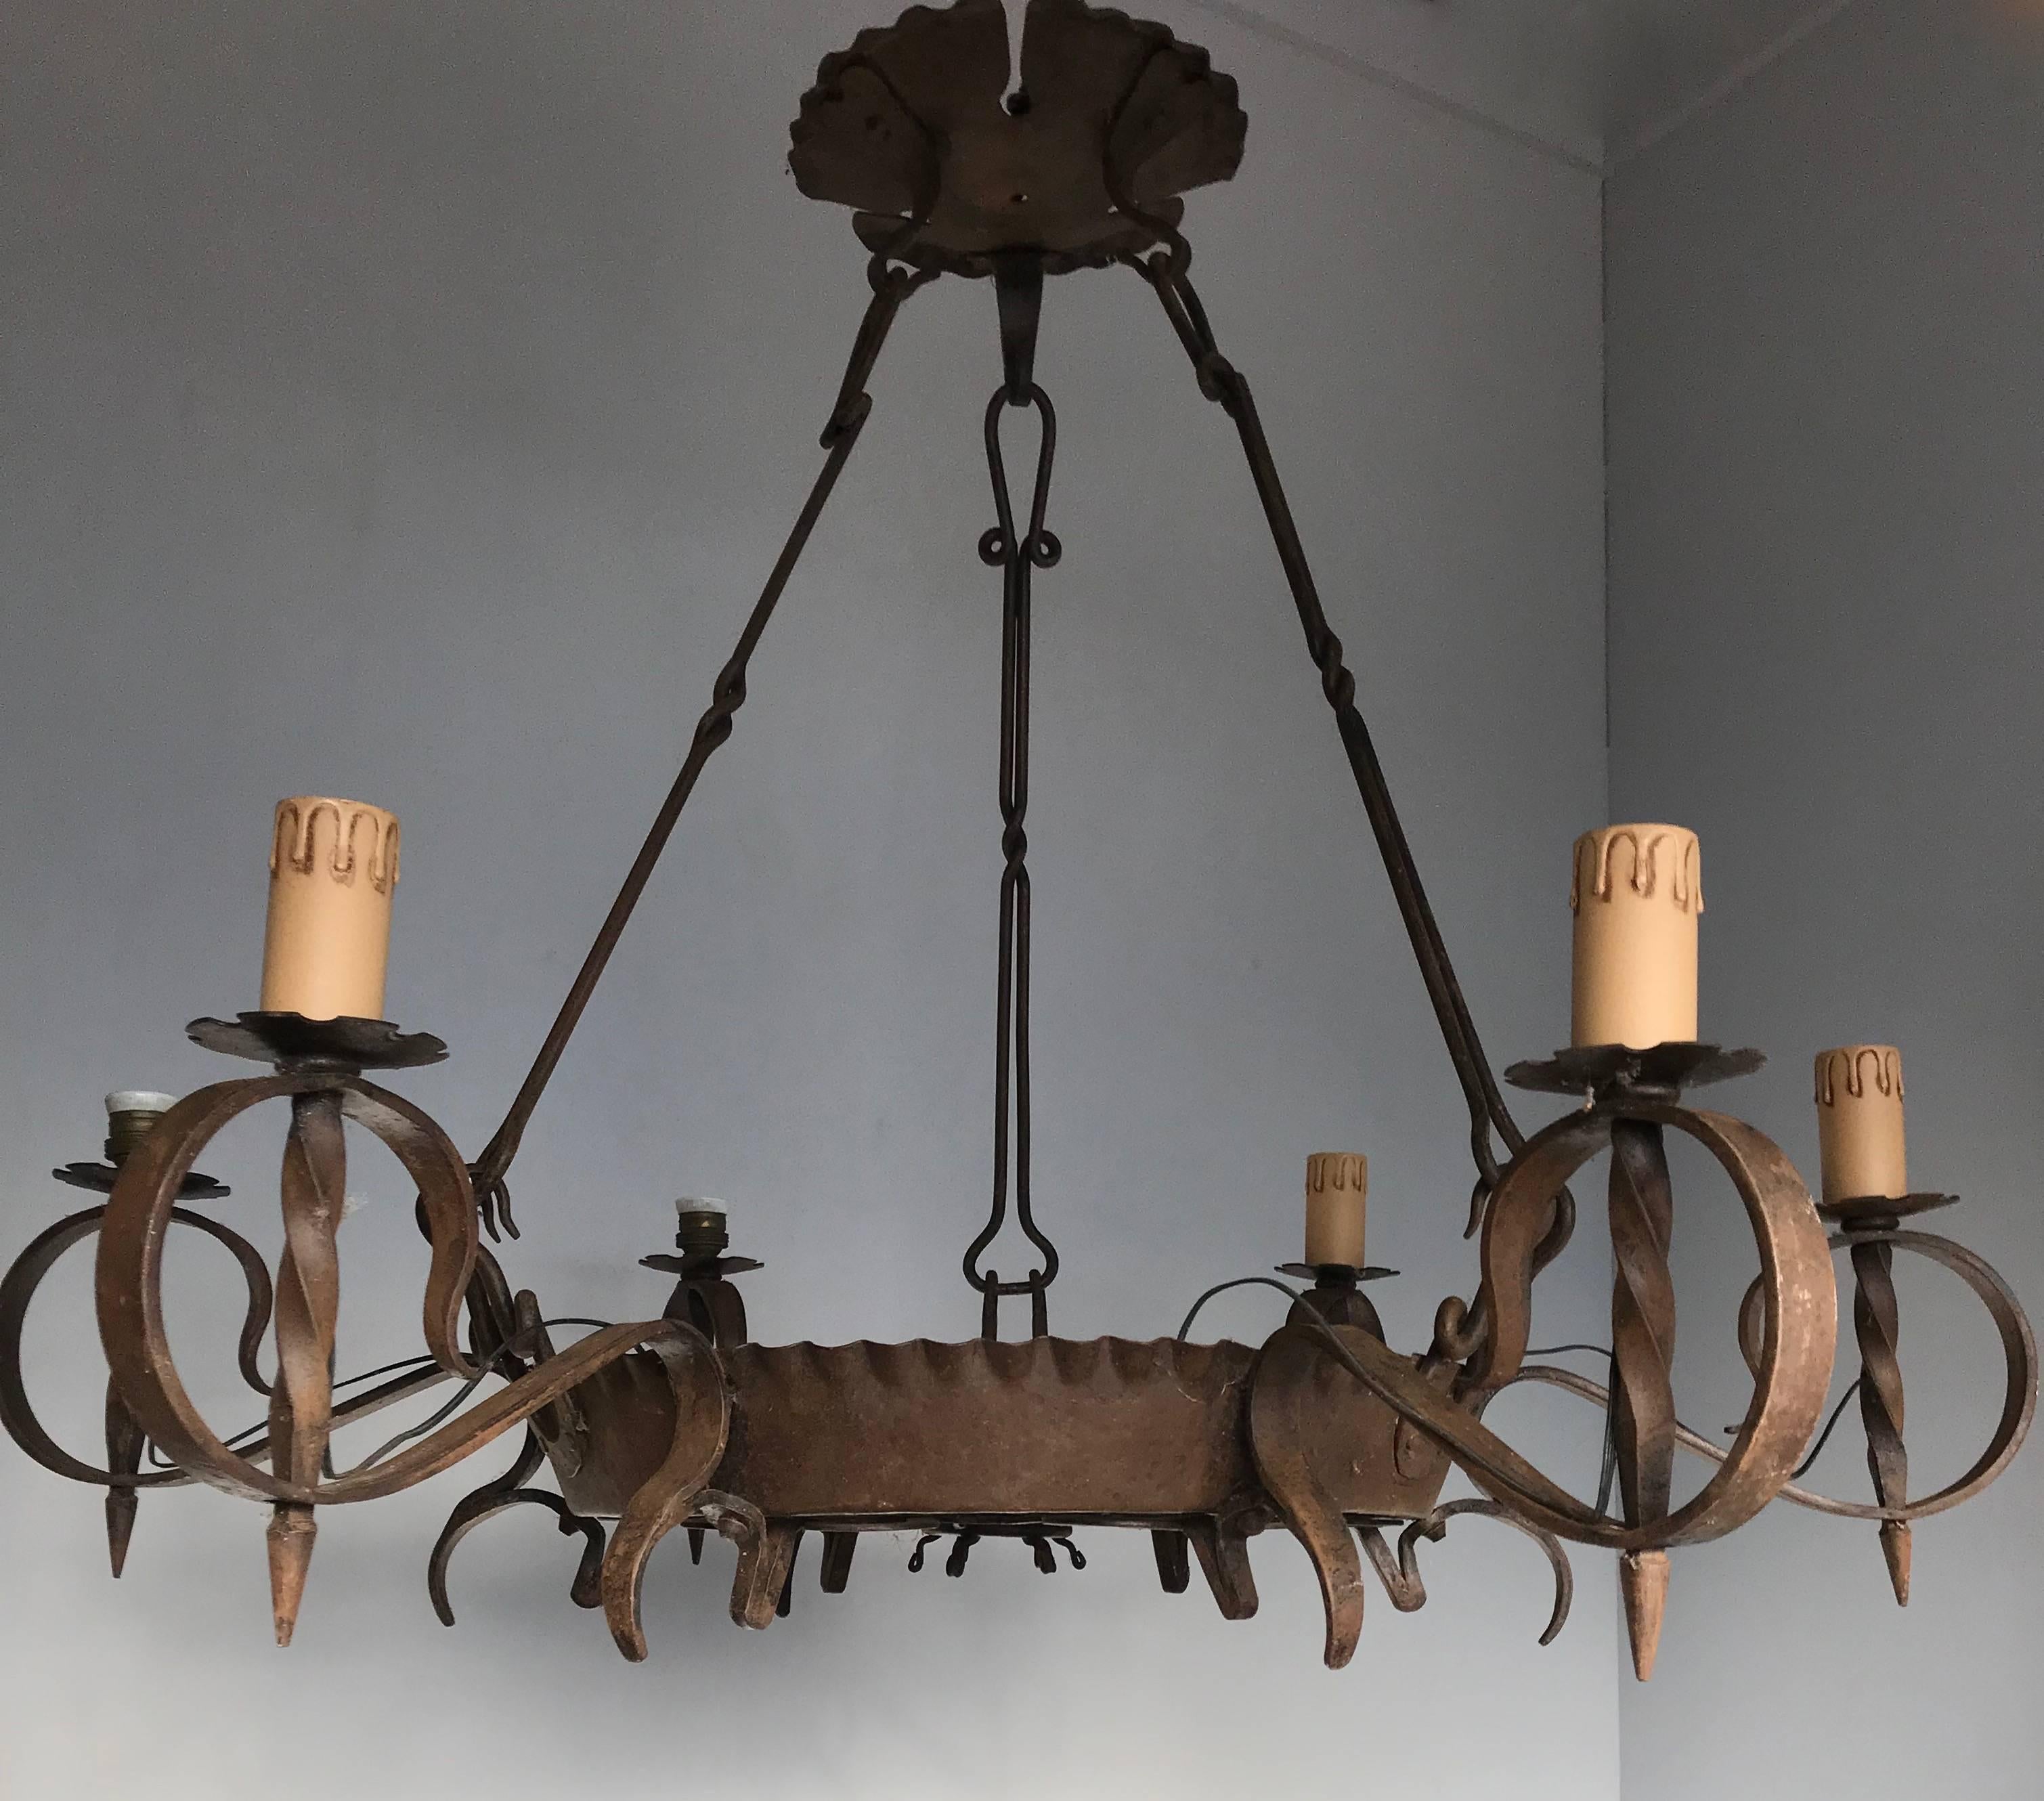 Hand-Crafted Antique Large Arts and Crafts Wrought Iron Medieval and Castle Style Chandelier